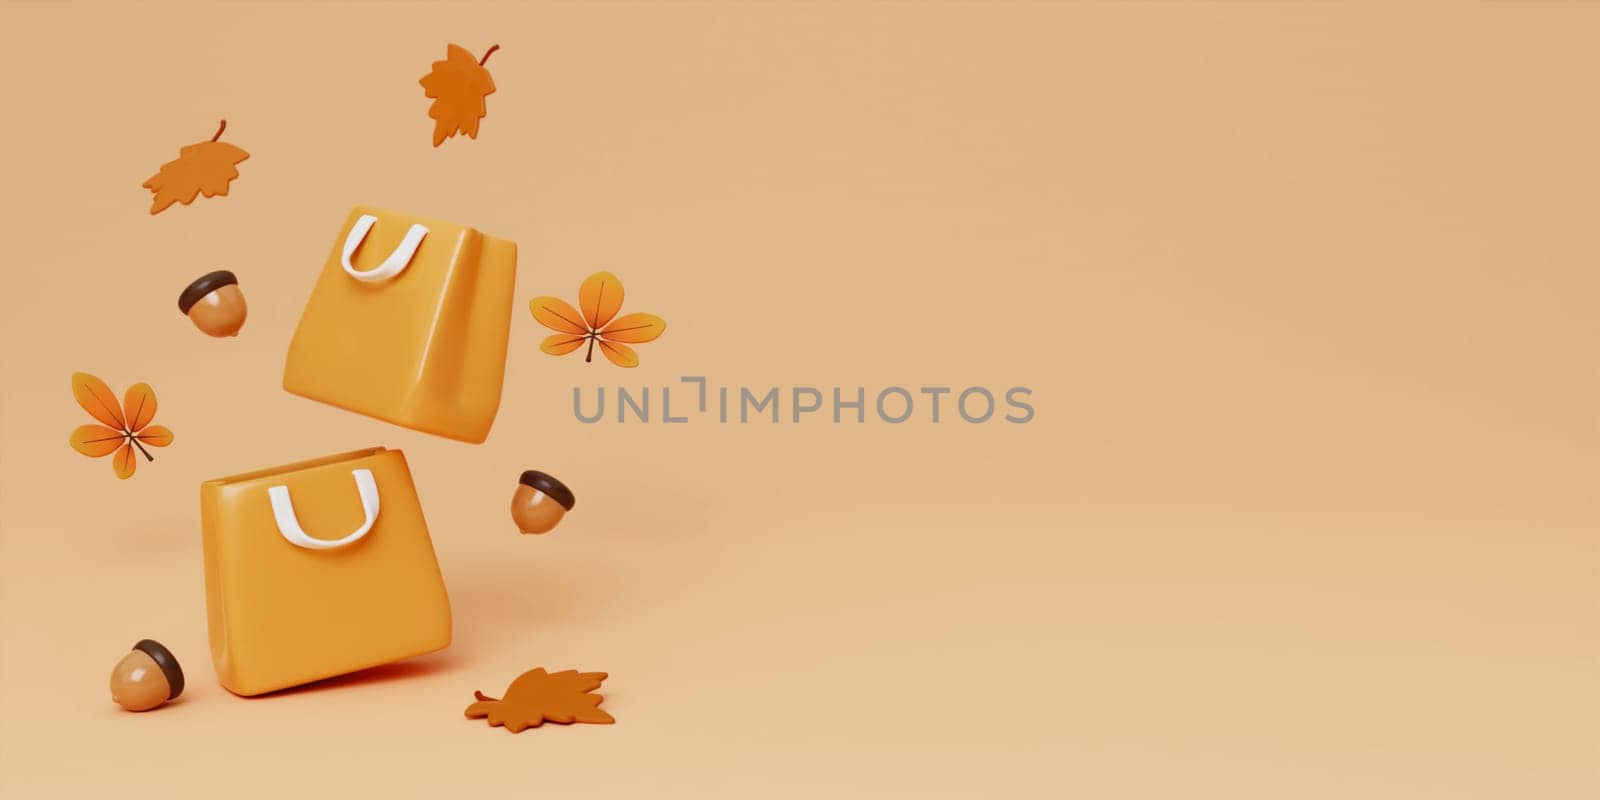 3d shopping bag, walnut, gift boxes, leaves. 3d render for banner or poster design for autumn sale. copy space. delicate pastel colors. 3d rendering by meepiangraphic